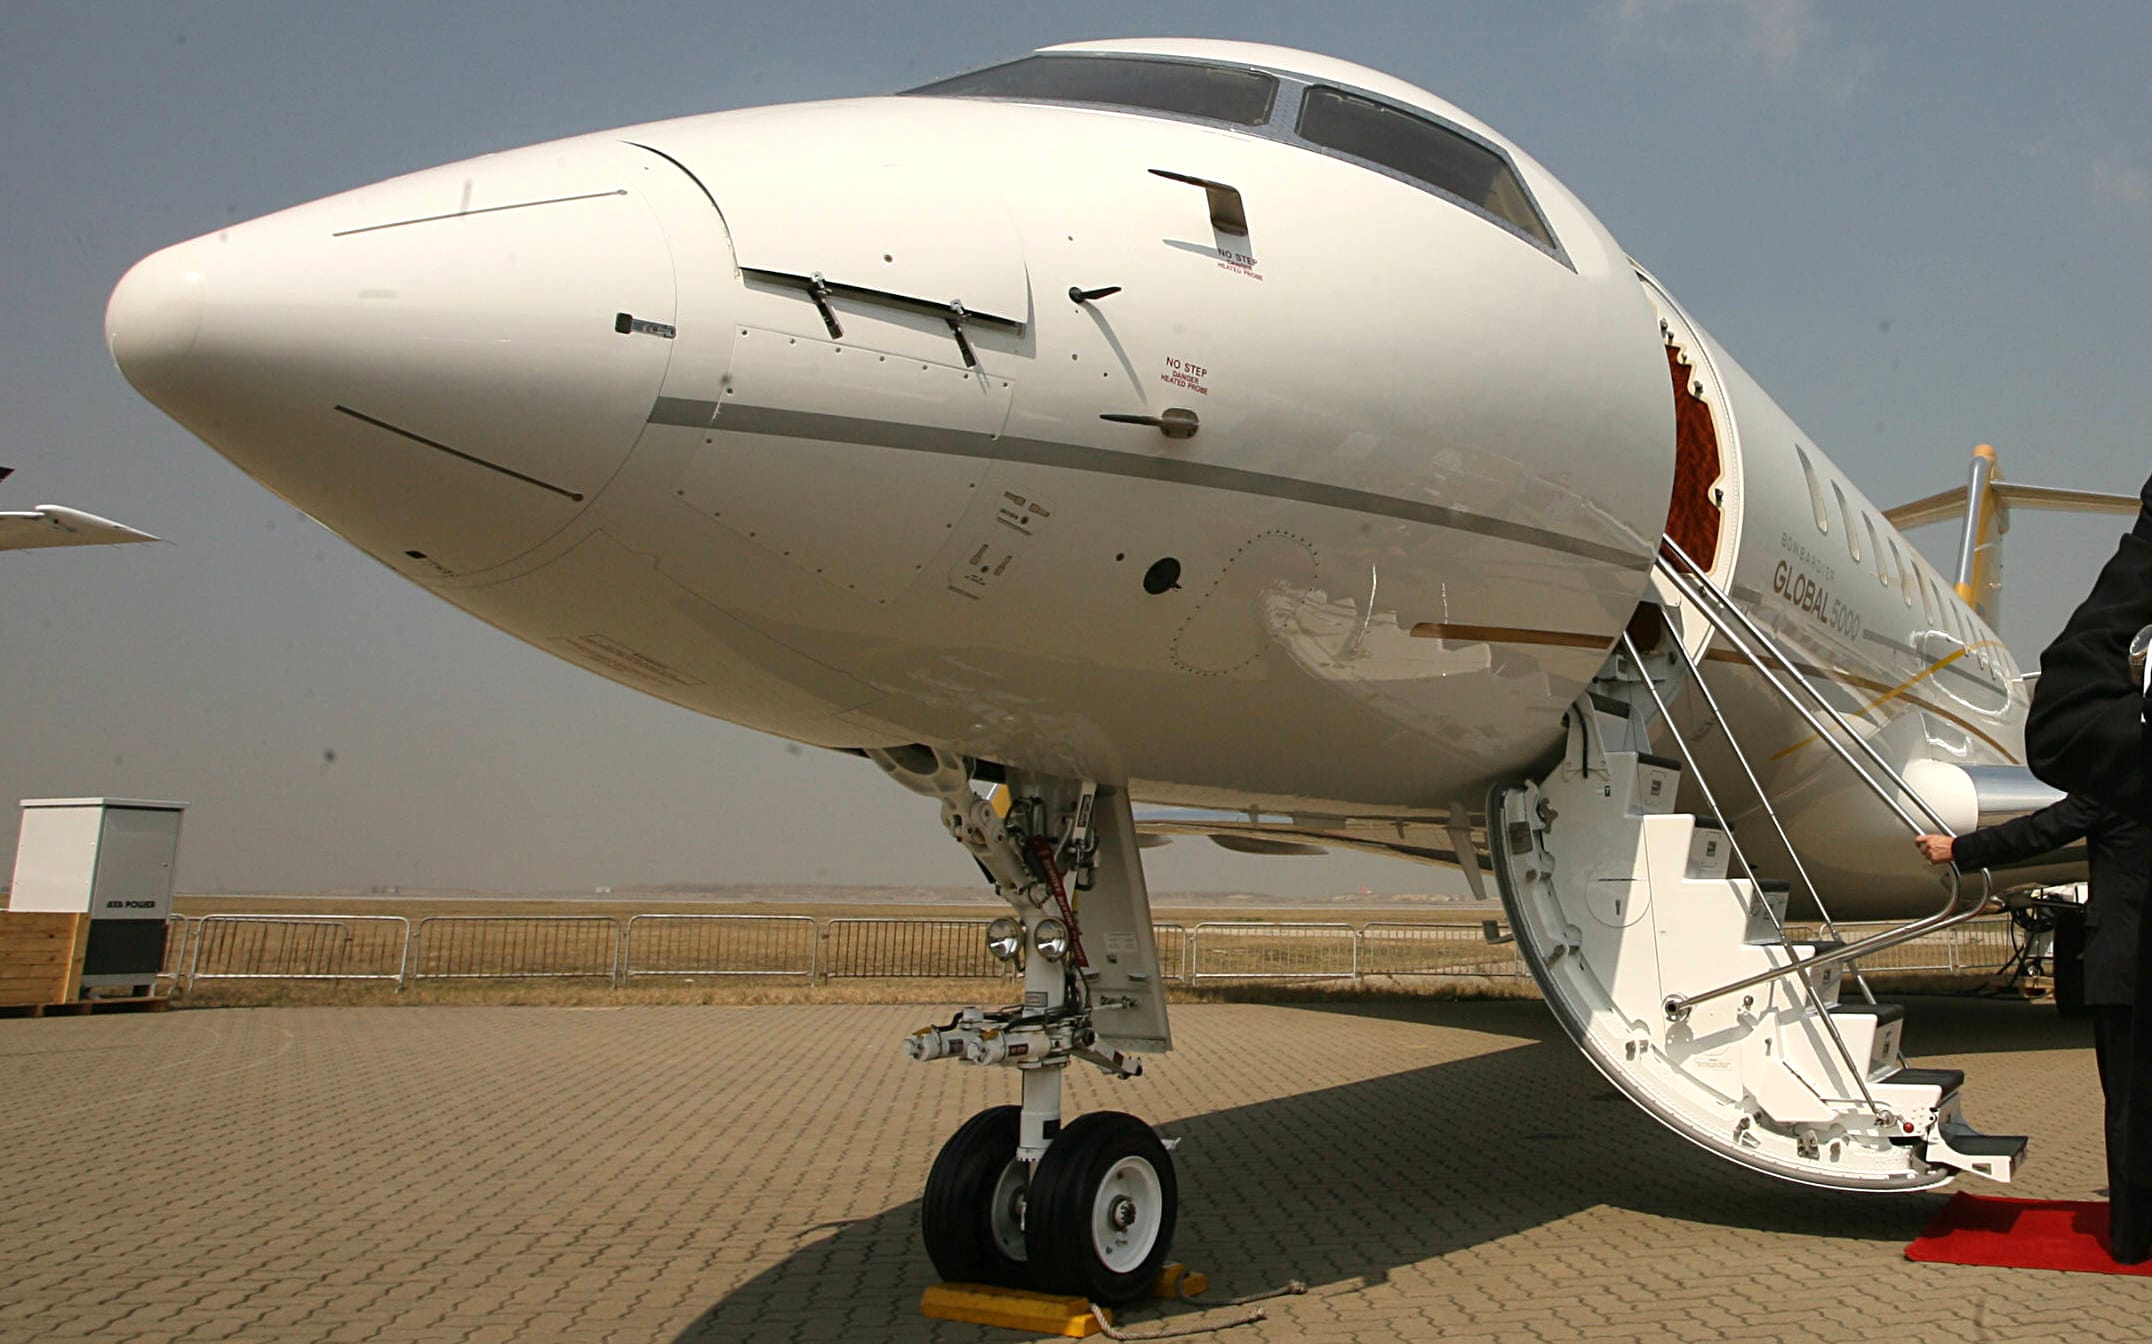 The disputed assets include a Bombardier Global 5000 jet, similar to the one pictured.